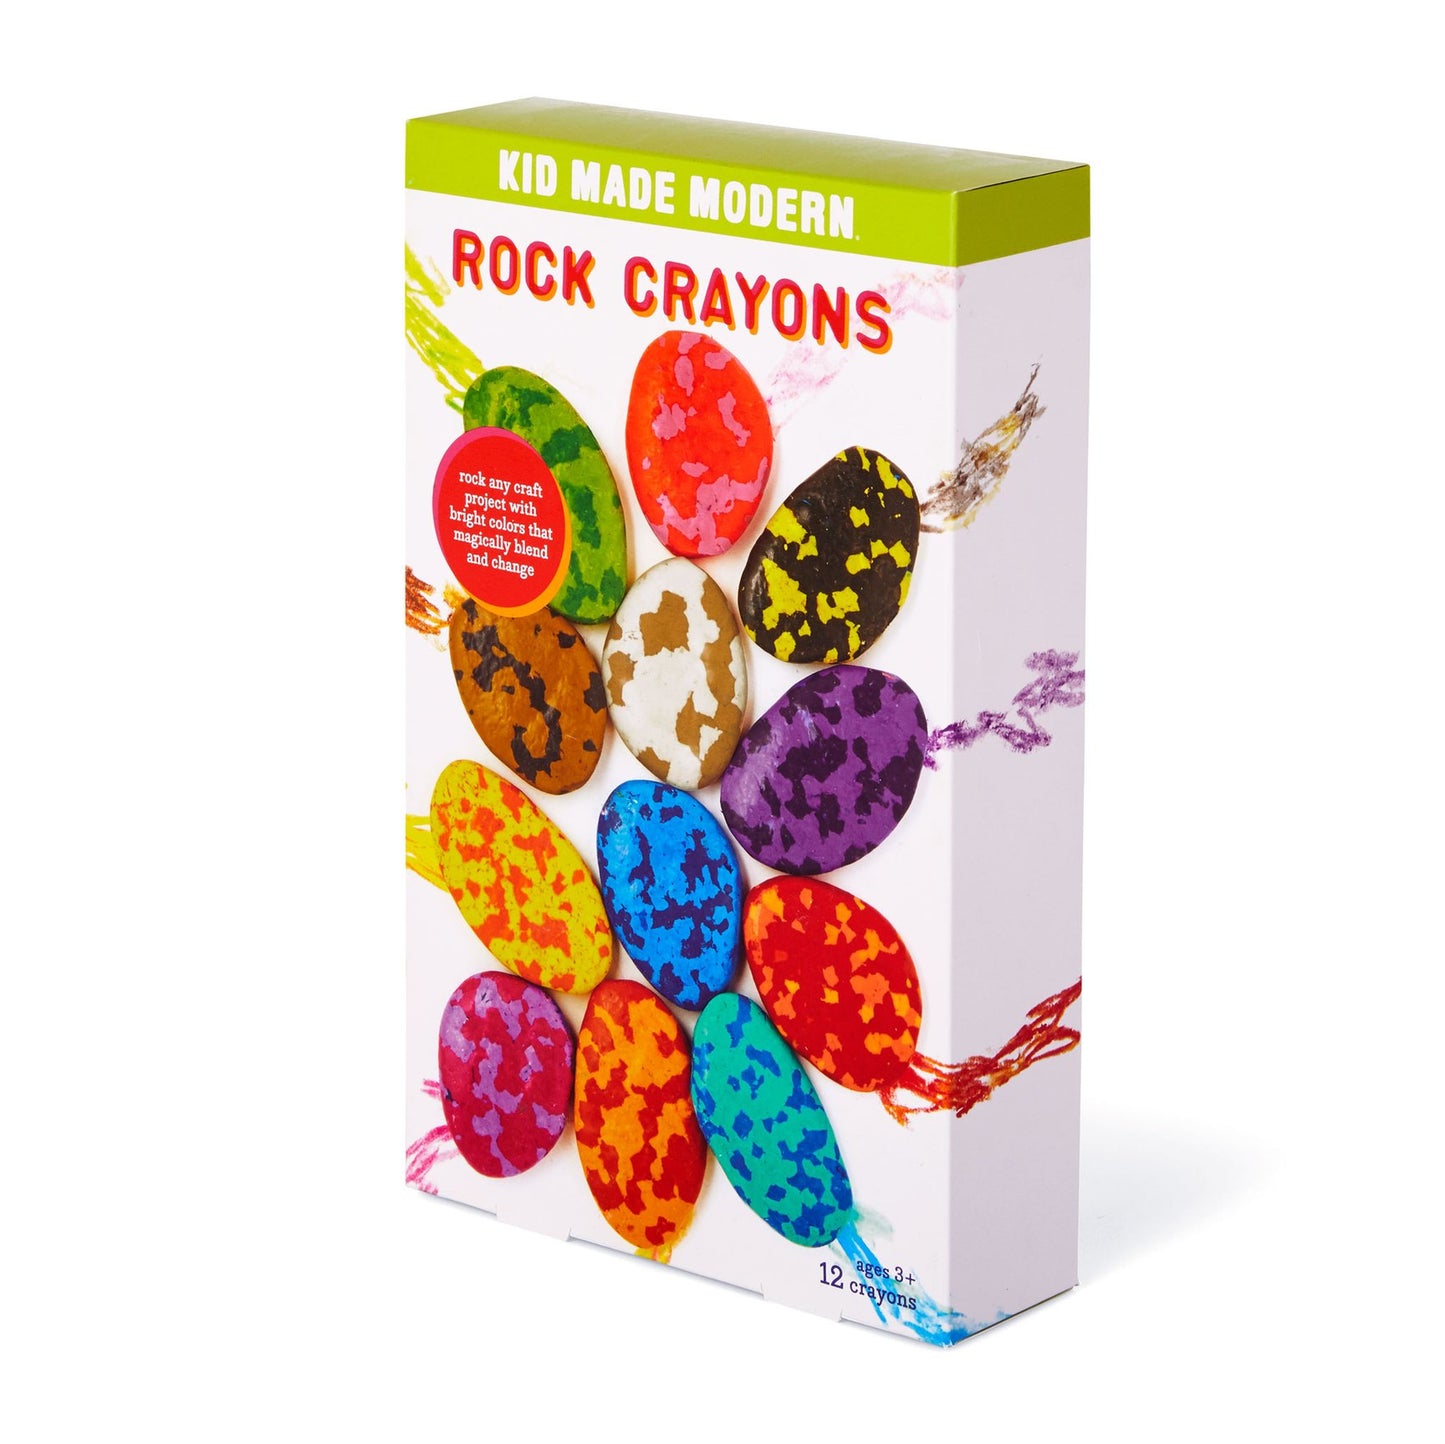 Rock Crayons in a Box